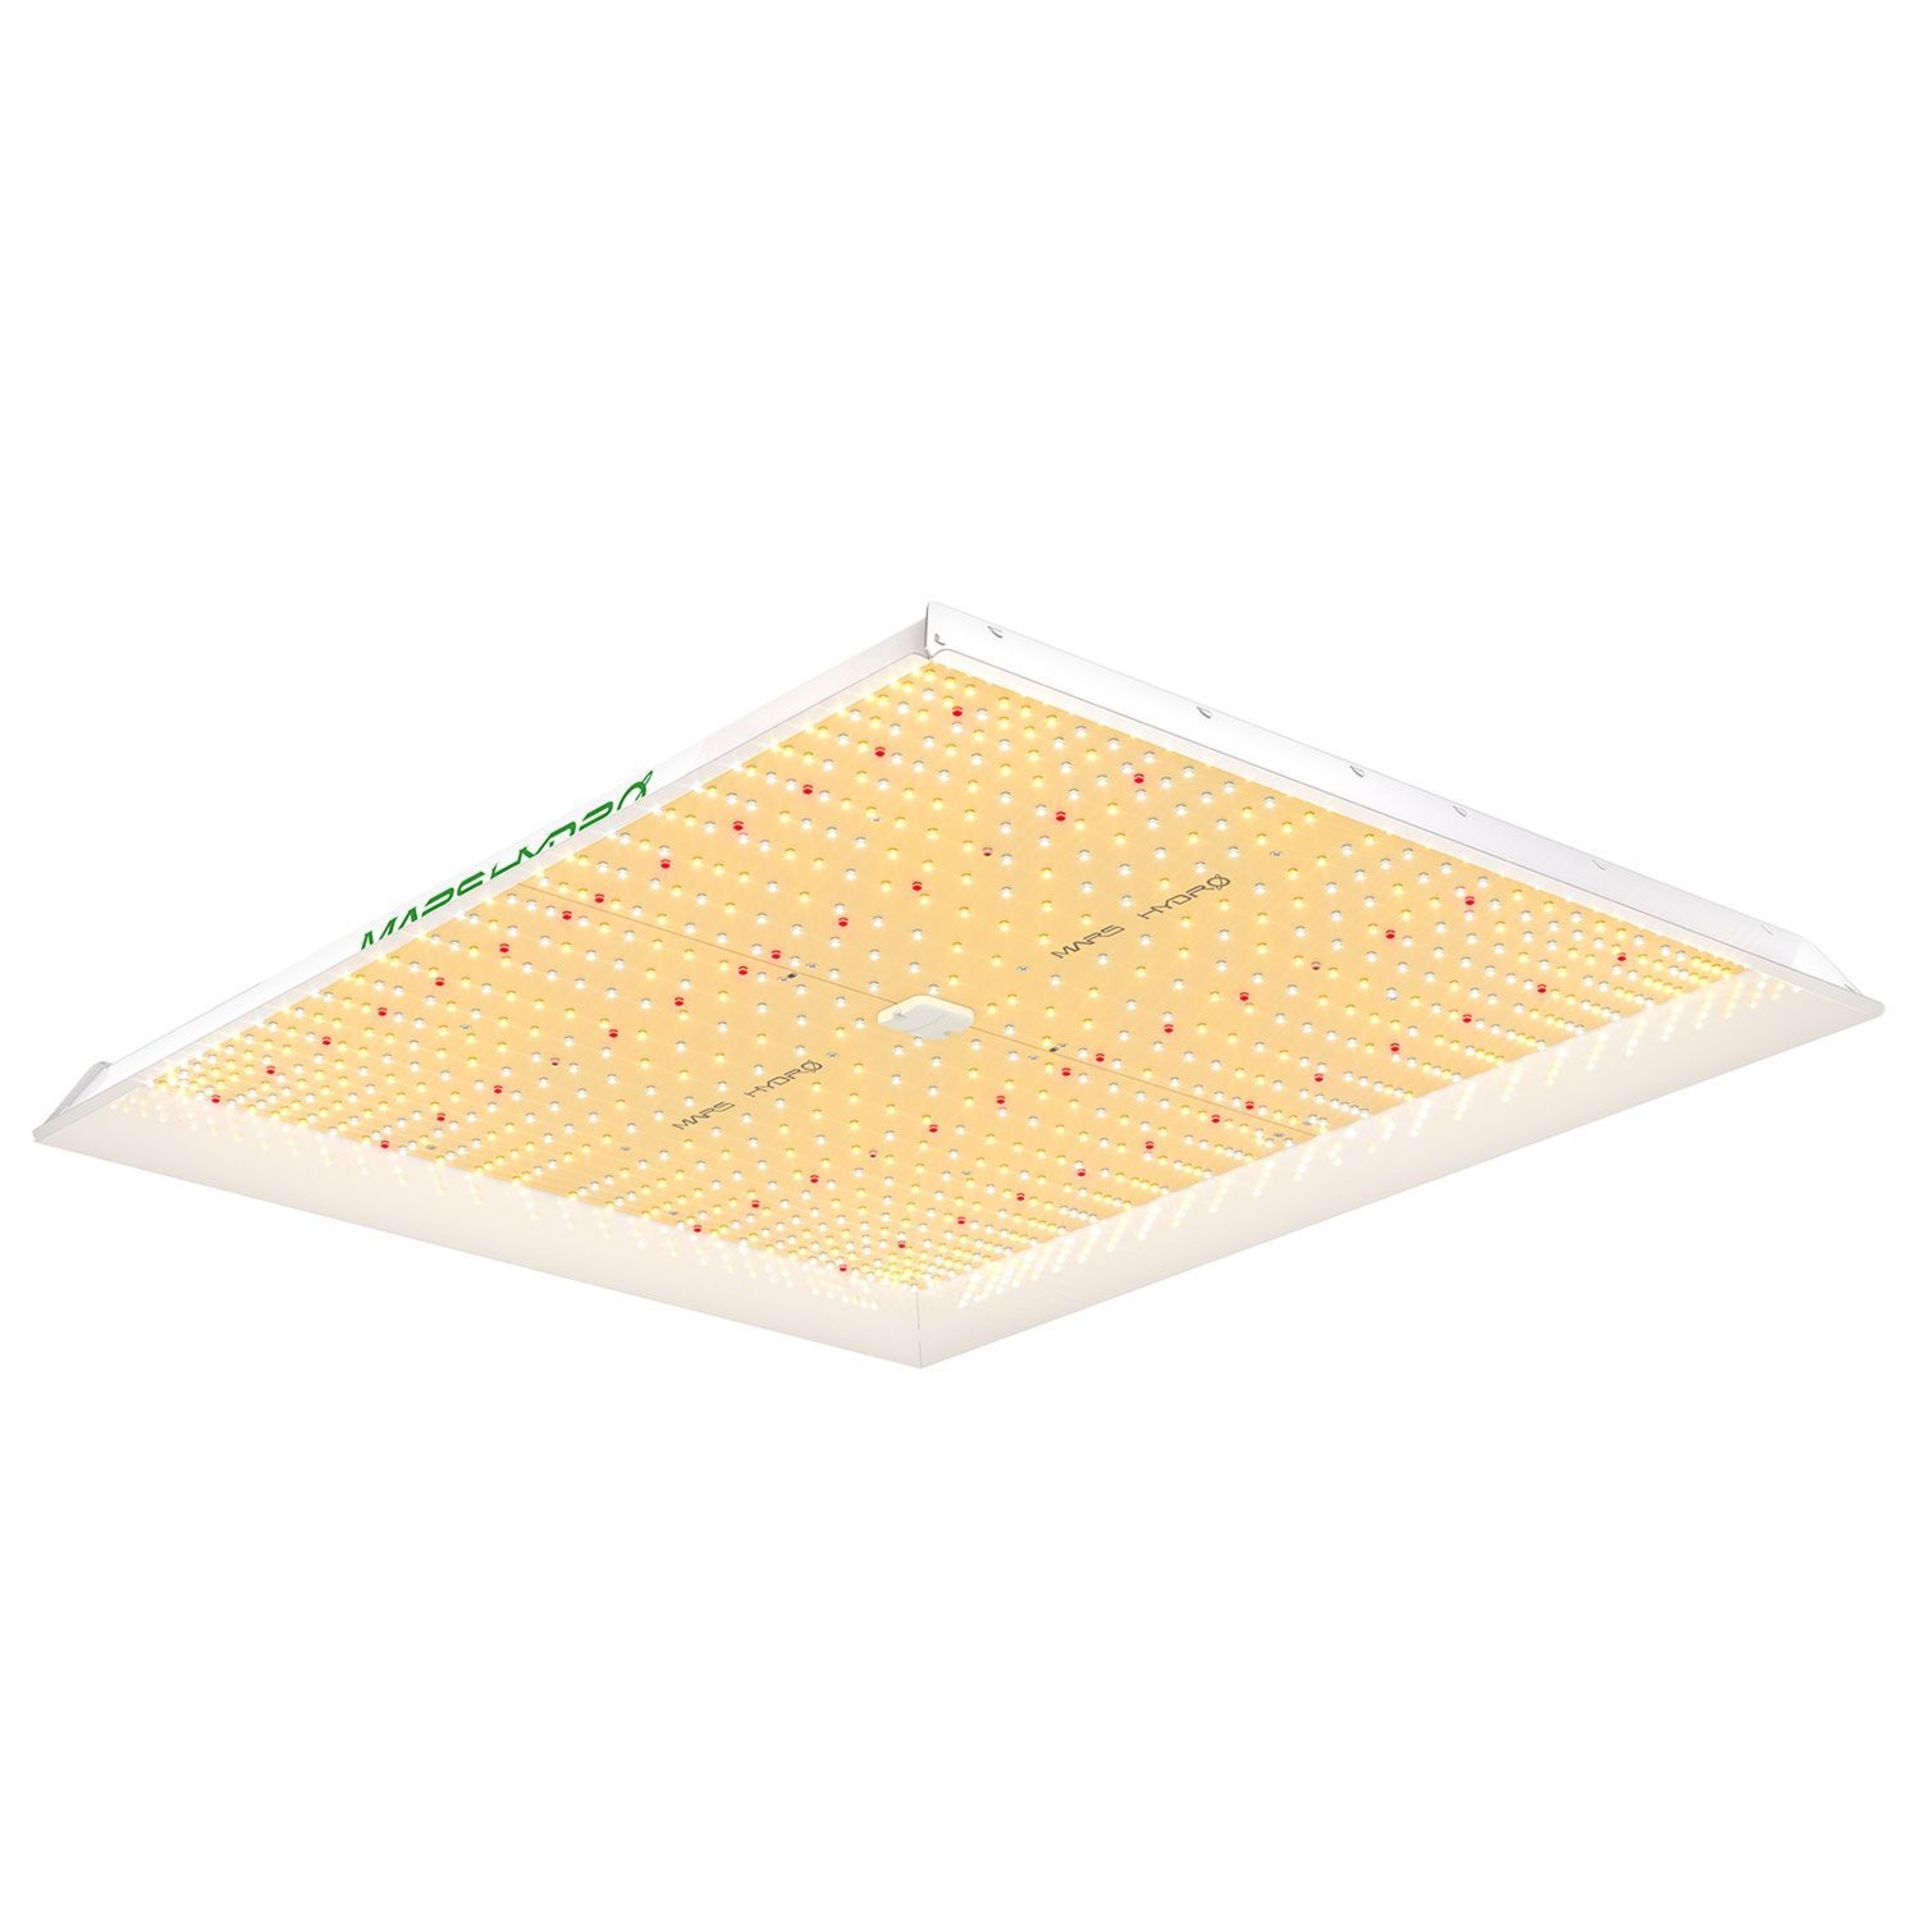 Mars Hydro TS 3000 450w Full Spectrum Hydroponic LED Grow Light. - R13a.7. TS3000, as the biggest - Image 2 of 2